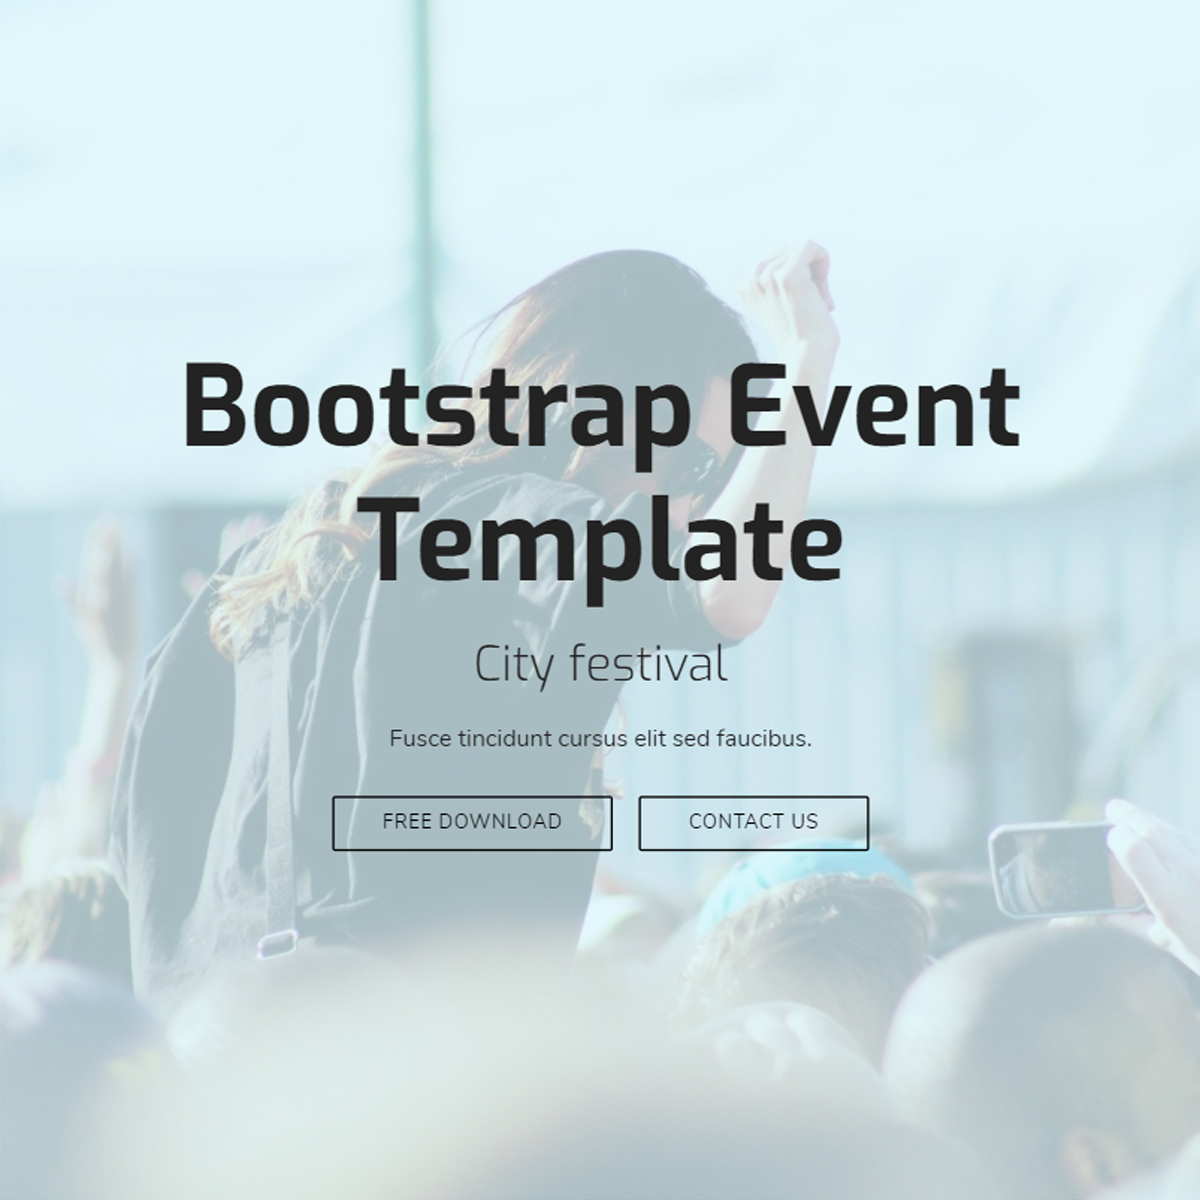 Bootstrap Event Template